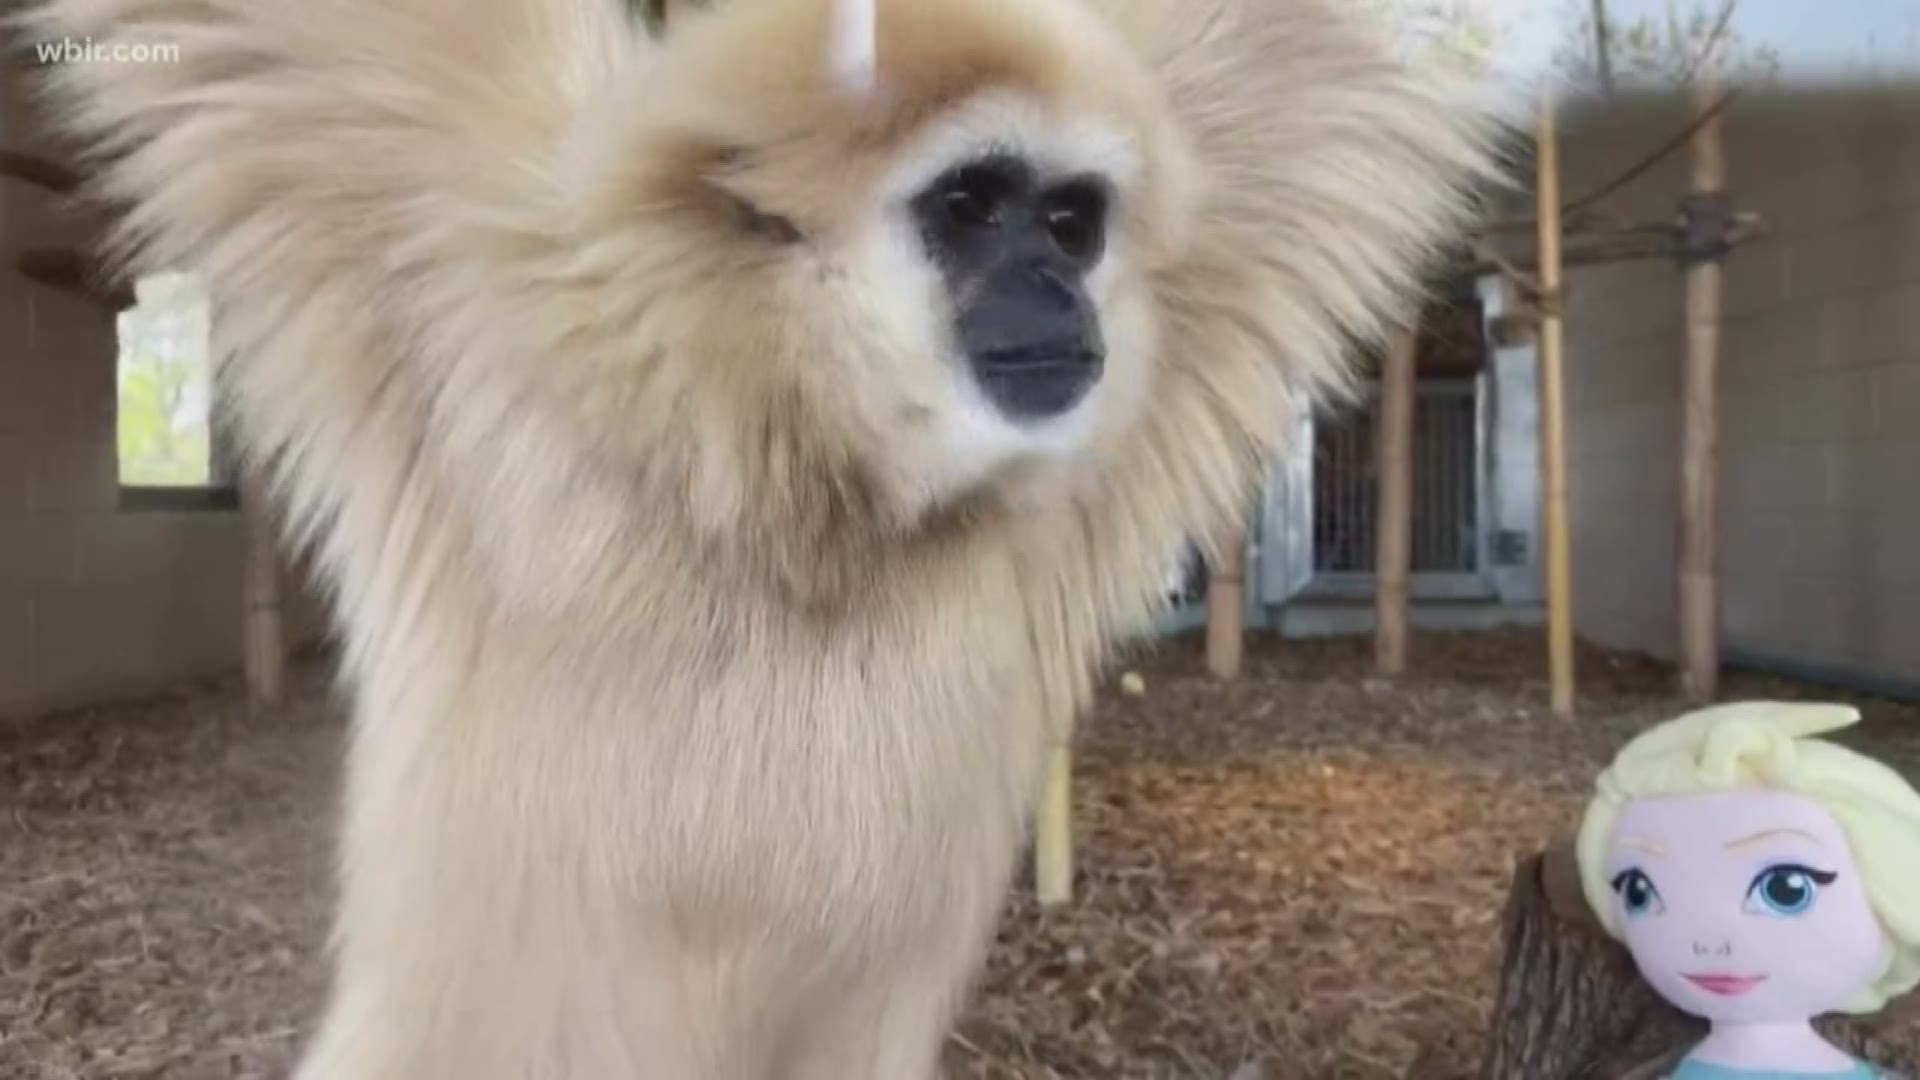 Zoo Knoxville shares some behind-the-scenes of their Gibbons exhibit. Visit zooknoxville.org to learn how to help them. April 3, 2020-4pm.